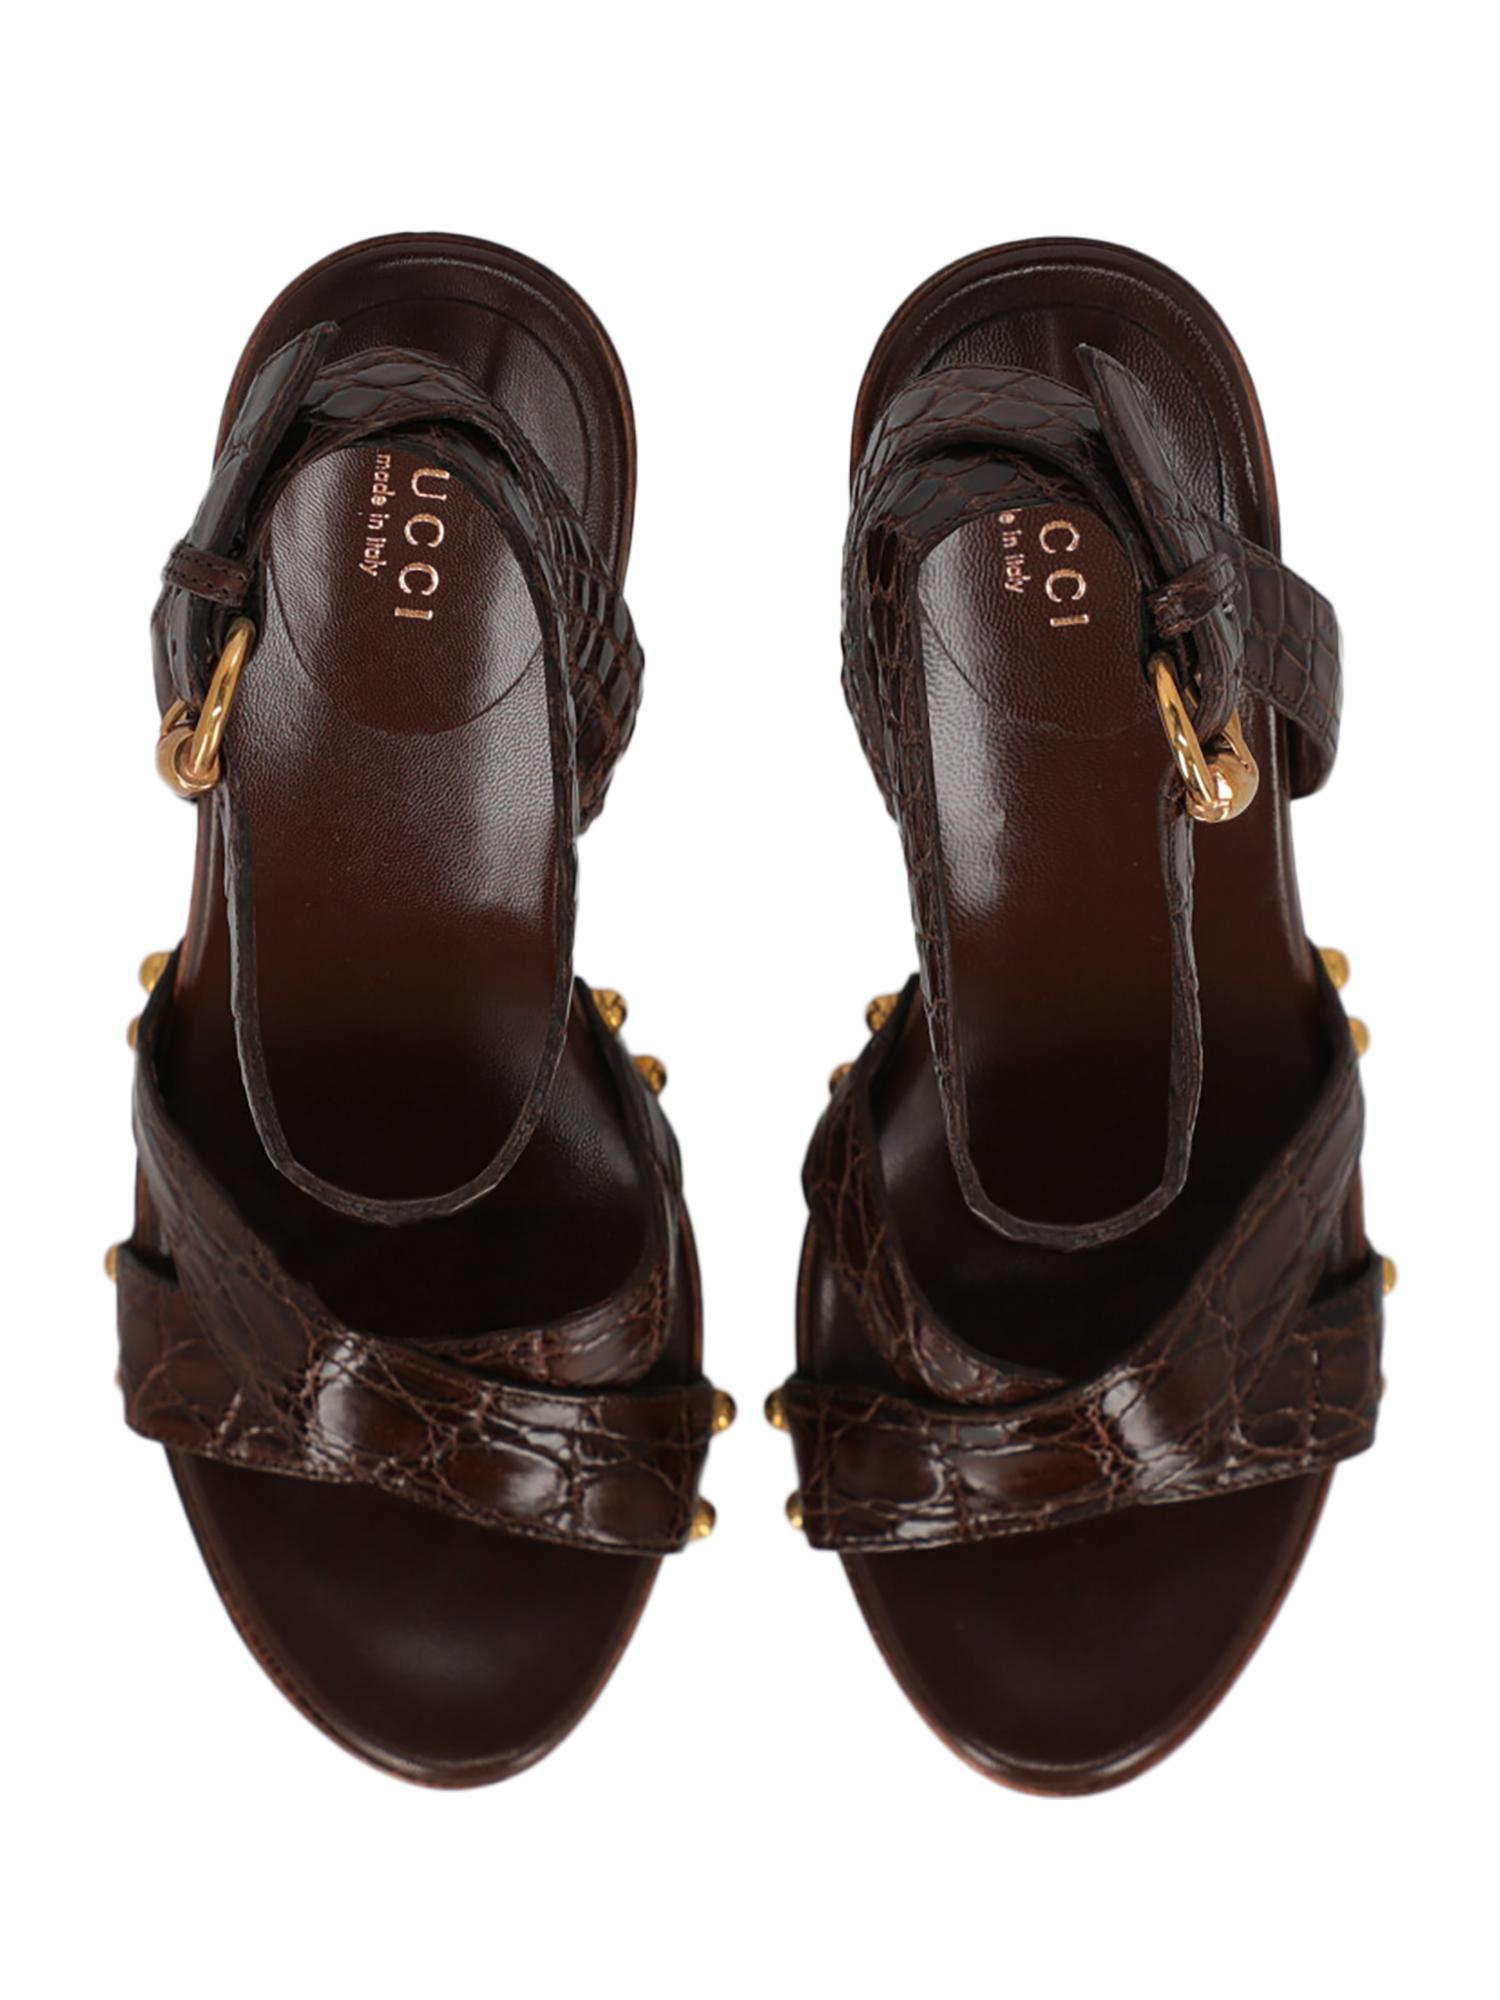 Gucci Women Sandals Brown Leather EU 38 For Sale 1